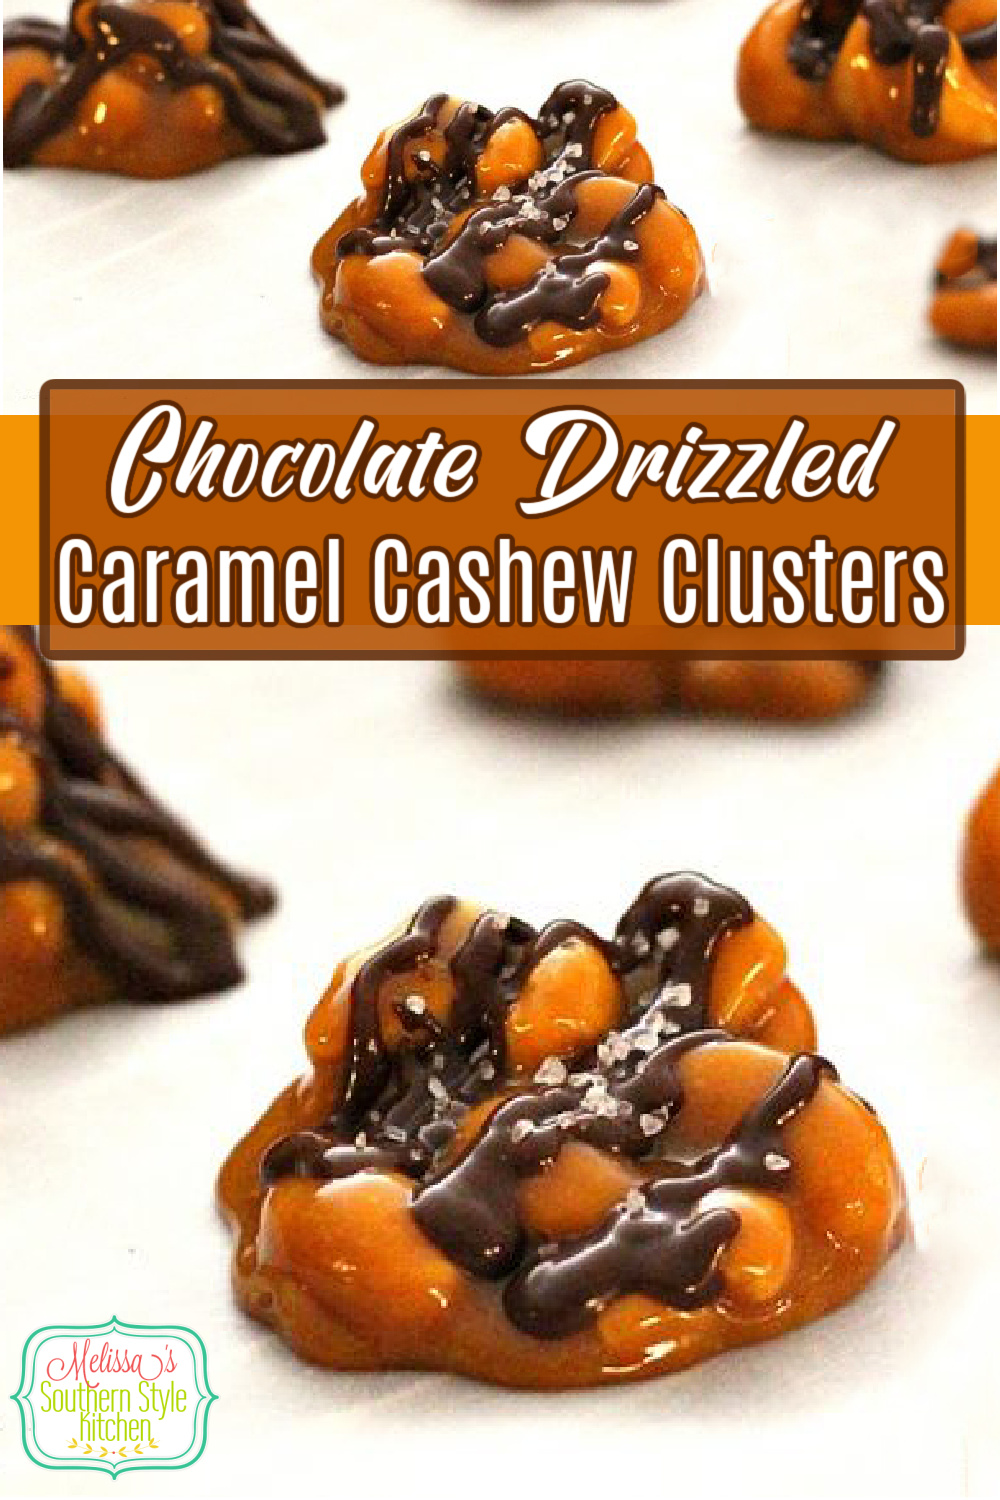 These Chocolate Drizzled Caramel Cashew Clusters are chewy and irresistible #cashewclusters #chocolate #caramelcashewclusters #candyrecipes #caramel #cashews #cashewcandy #holidays #holidaysweets #southernrecipes #southernfood via @melissasssk